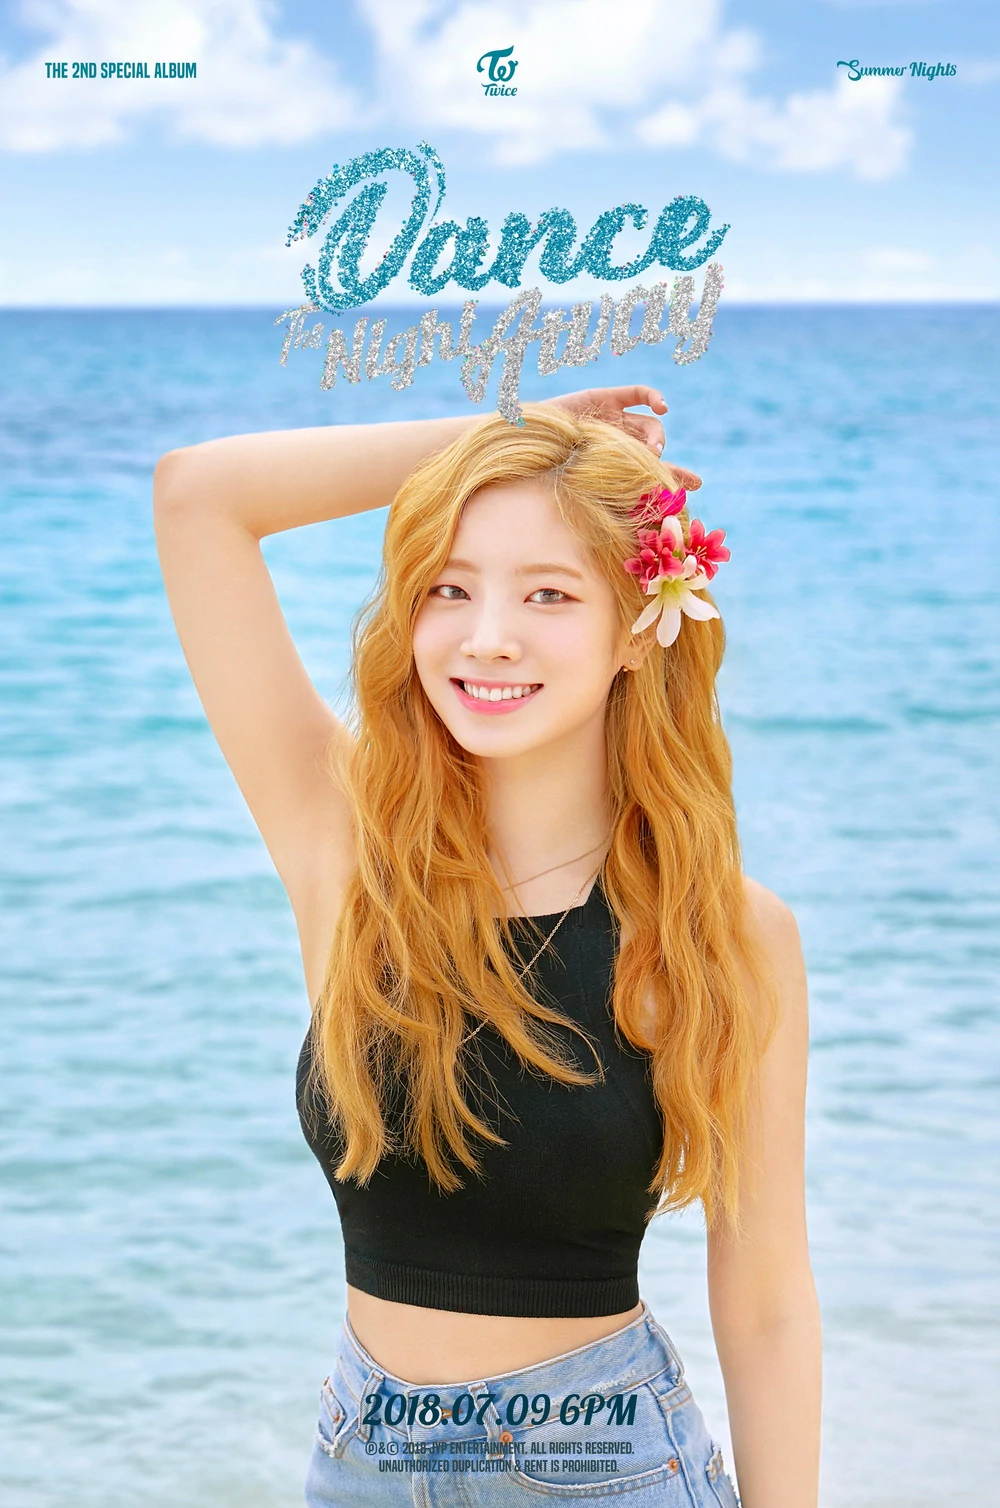 Twice Summer Nights Dahyun Concept Teaser Picture Image Photo Kpop K-Concept 3